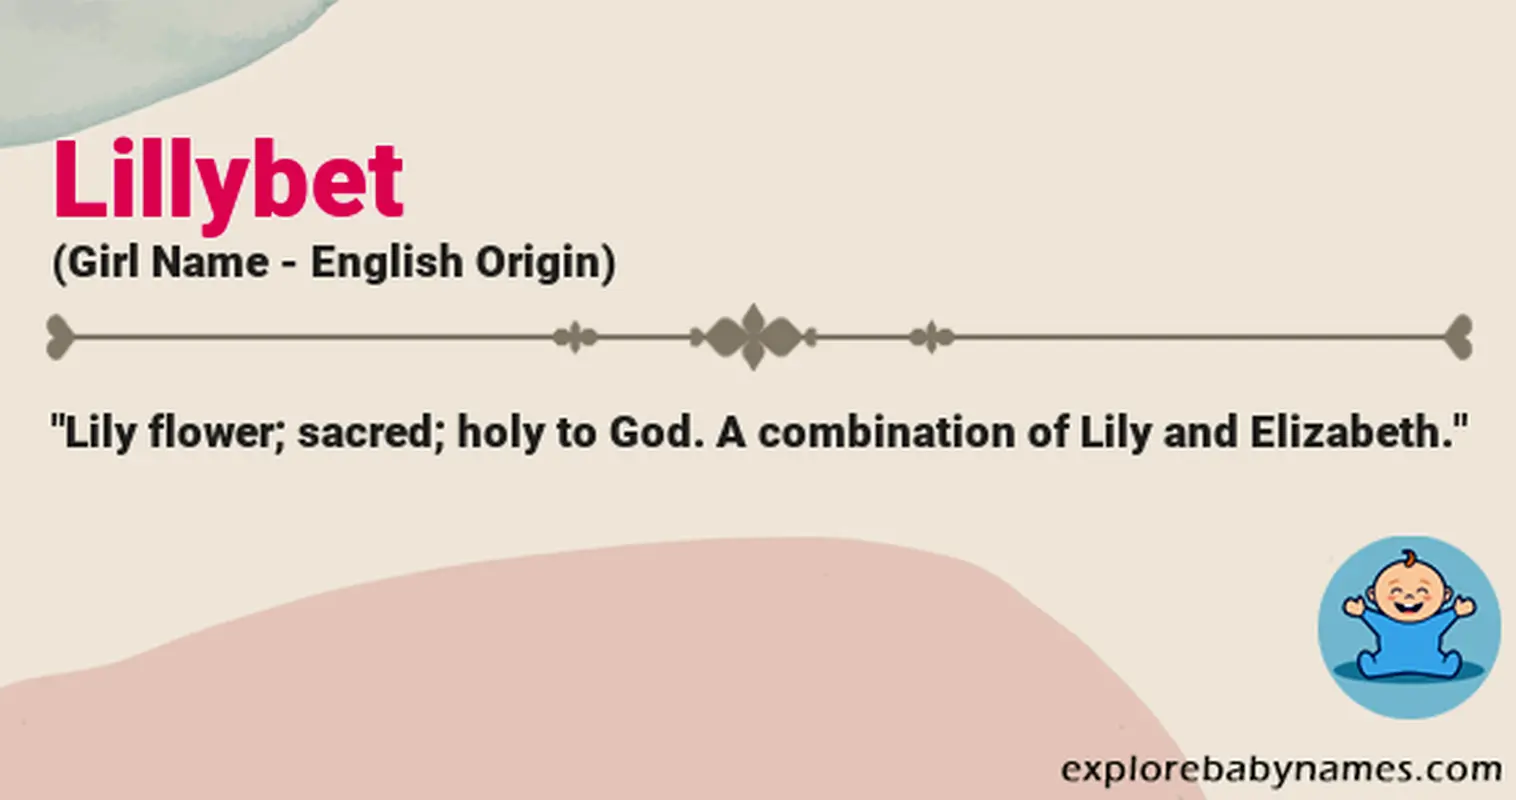 Meaning of Lillybet